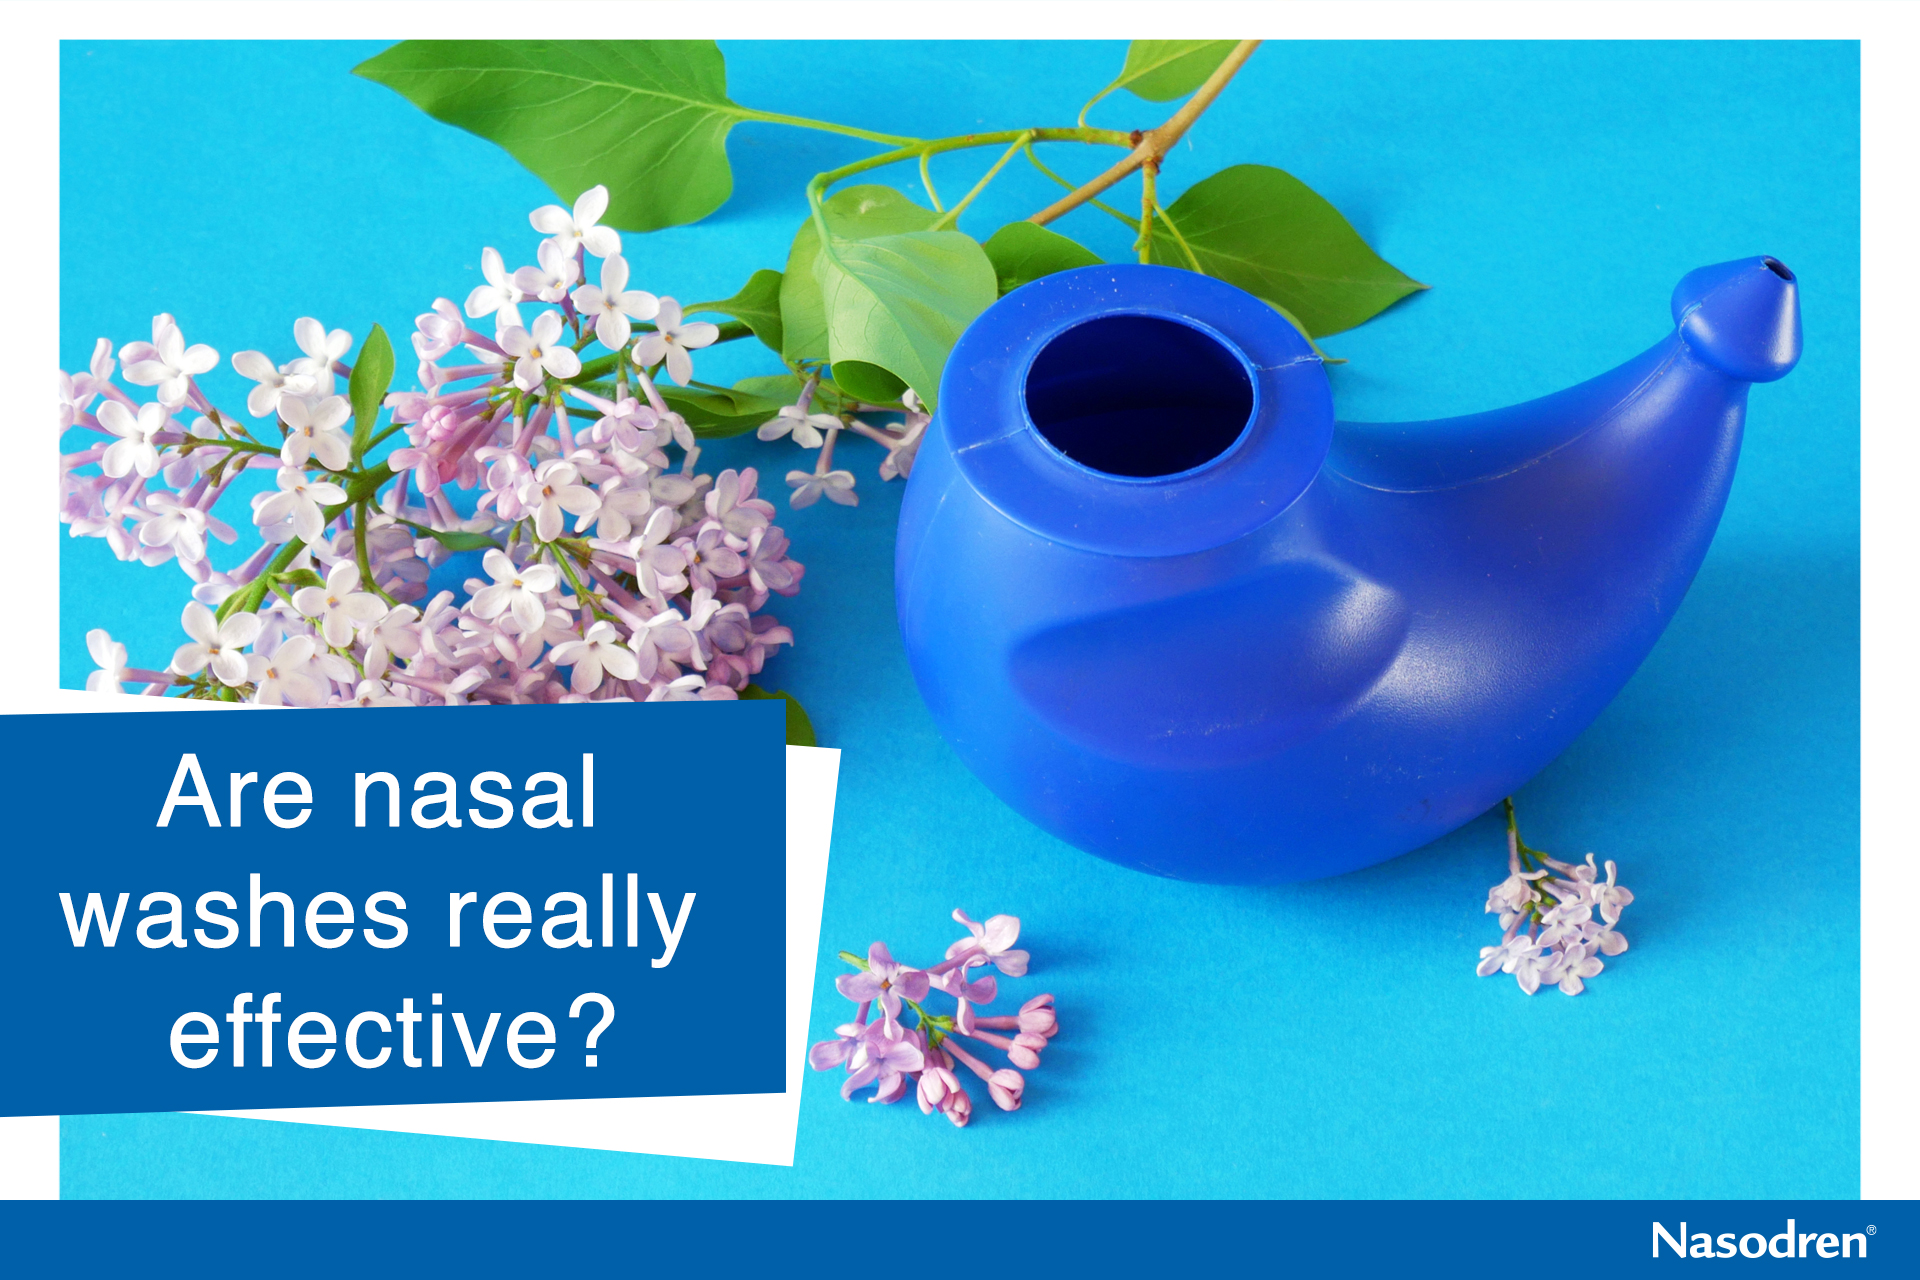 Are nasal washes really effective